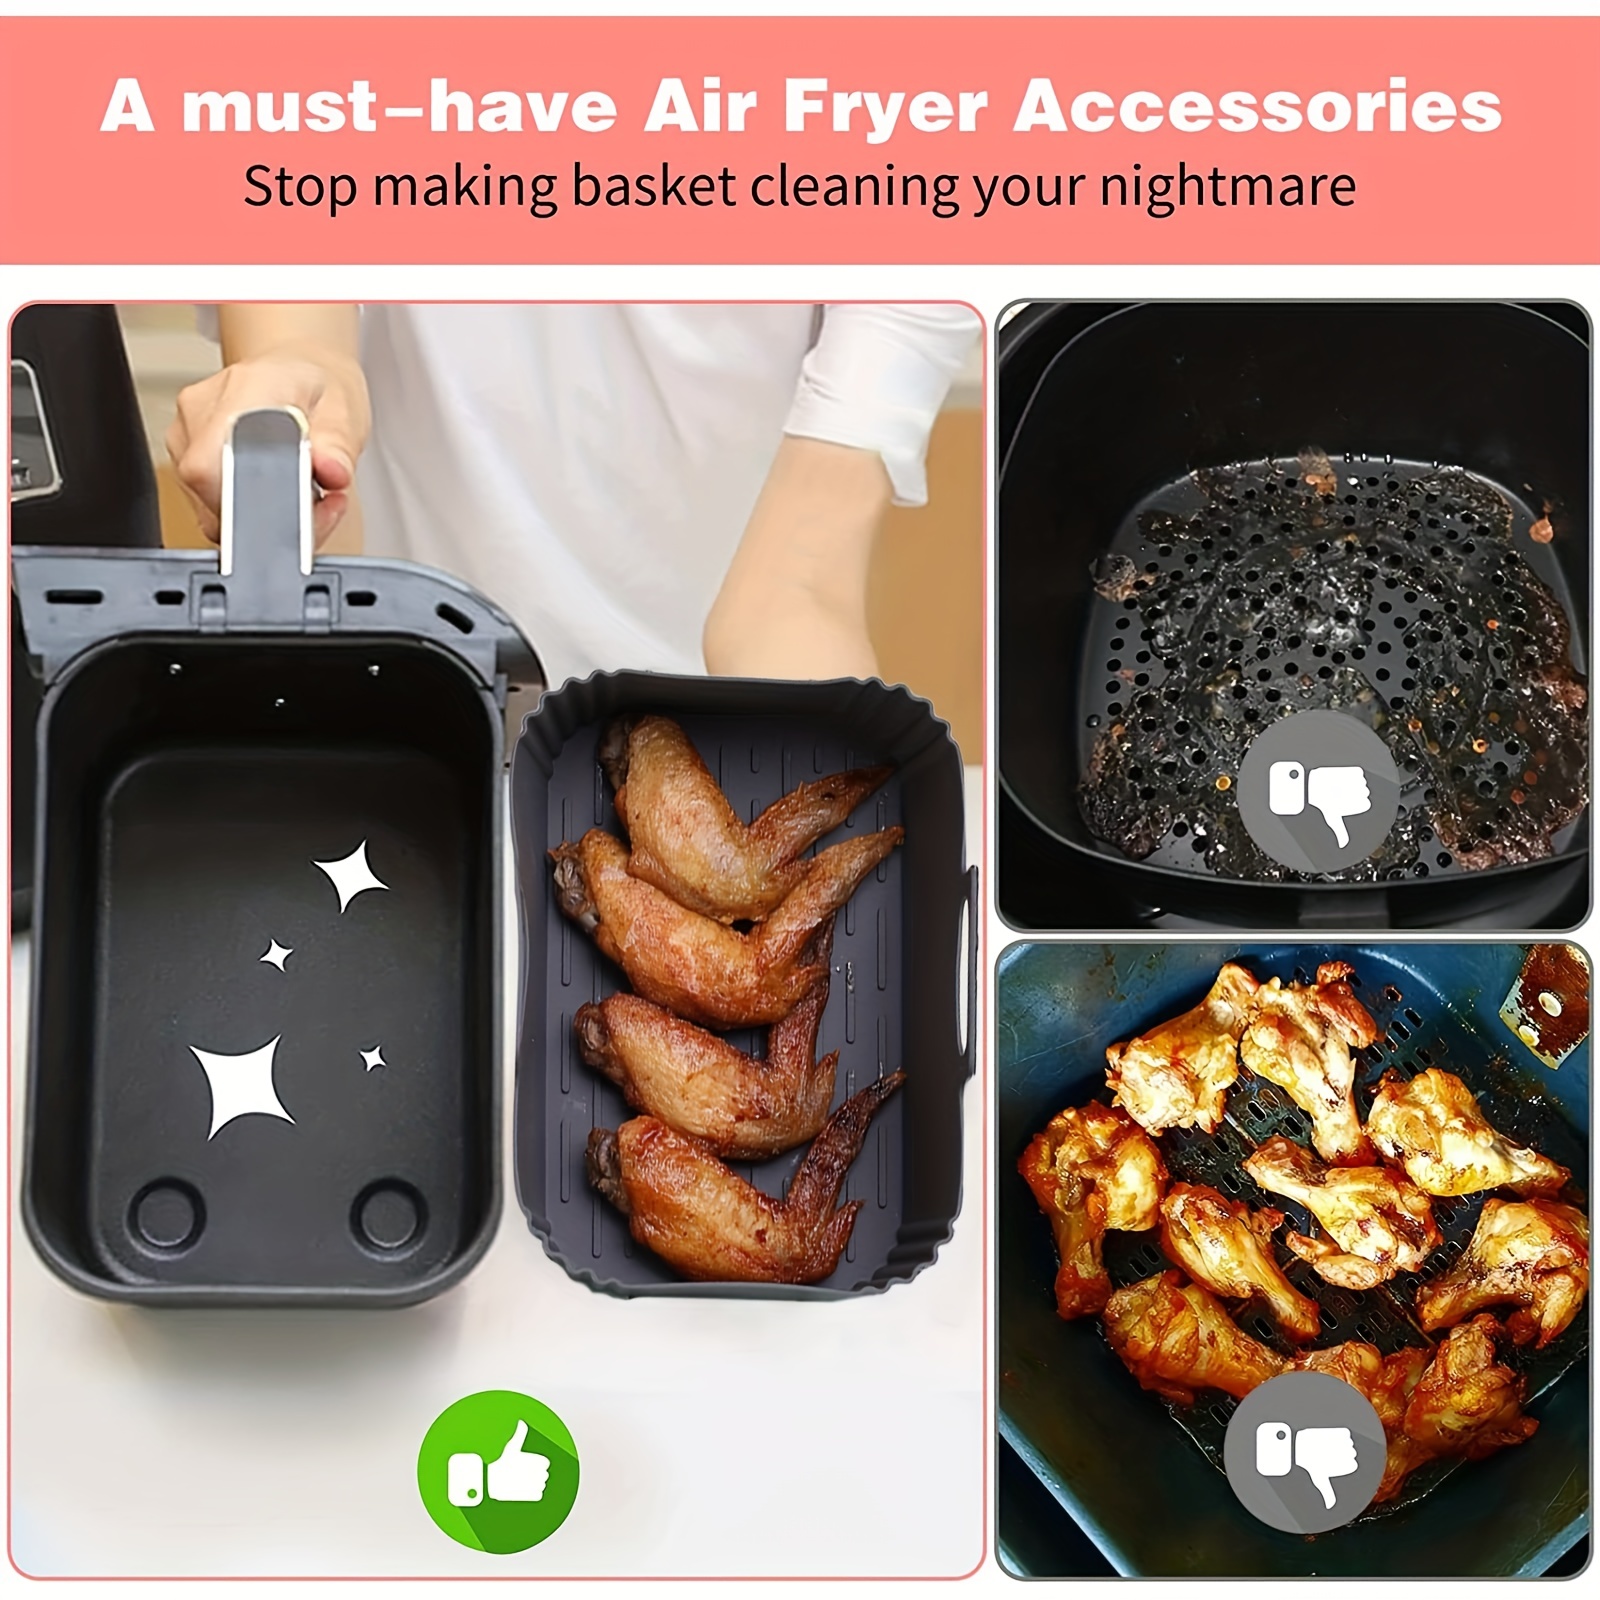  10QT Air Fryer Silicone Liners, MMH 2Pcs Rectangular Airfryer  Silicone Pot Baking Tray Reusable Replacement Basket Insert for Ninja DZ401/DZ550, Non-stick, Easy Cleaning, Food Safe